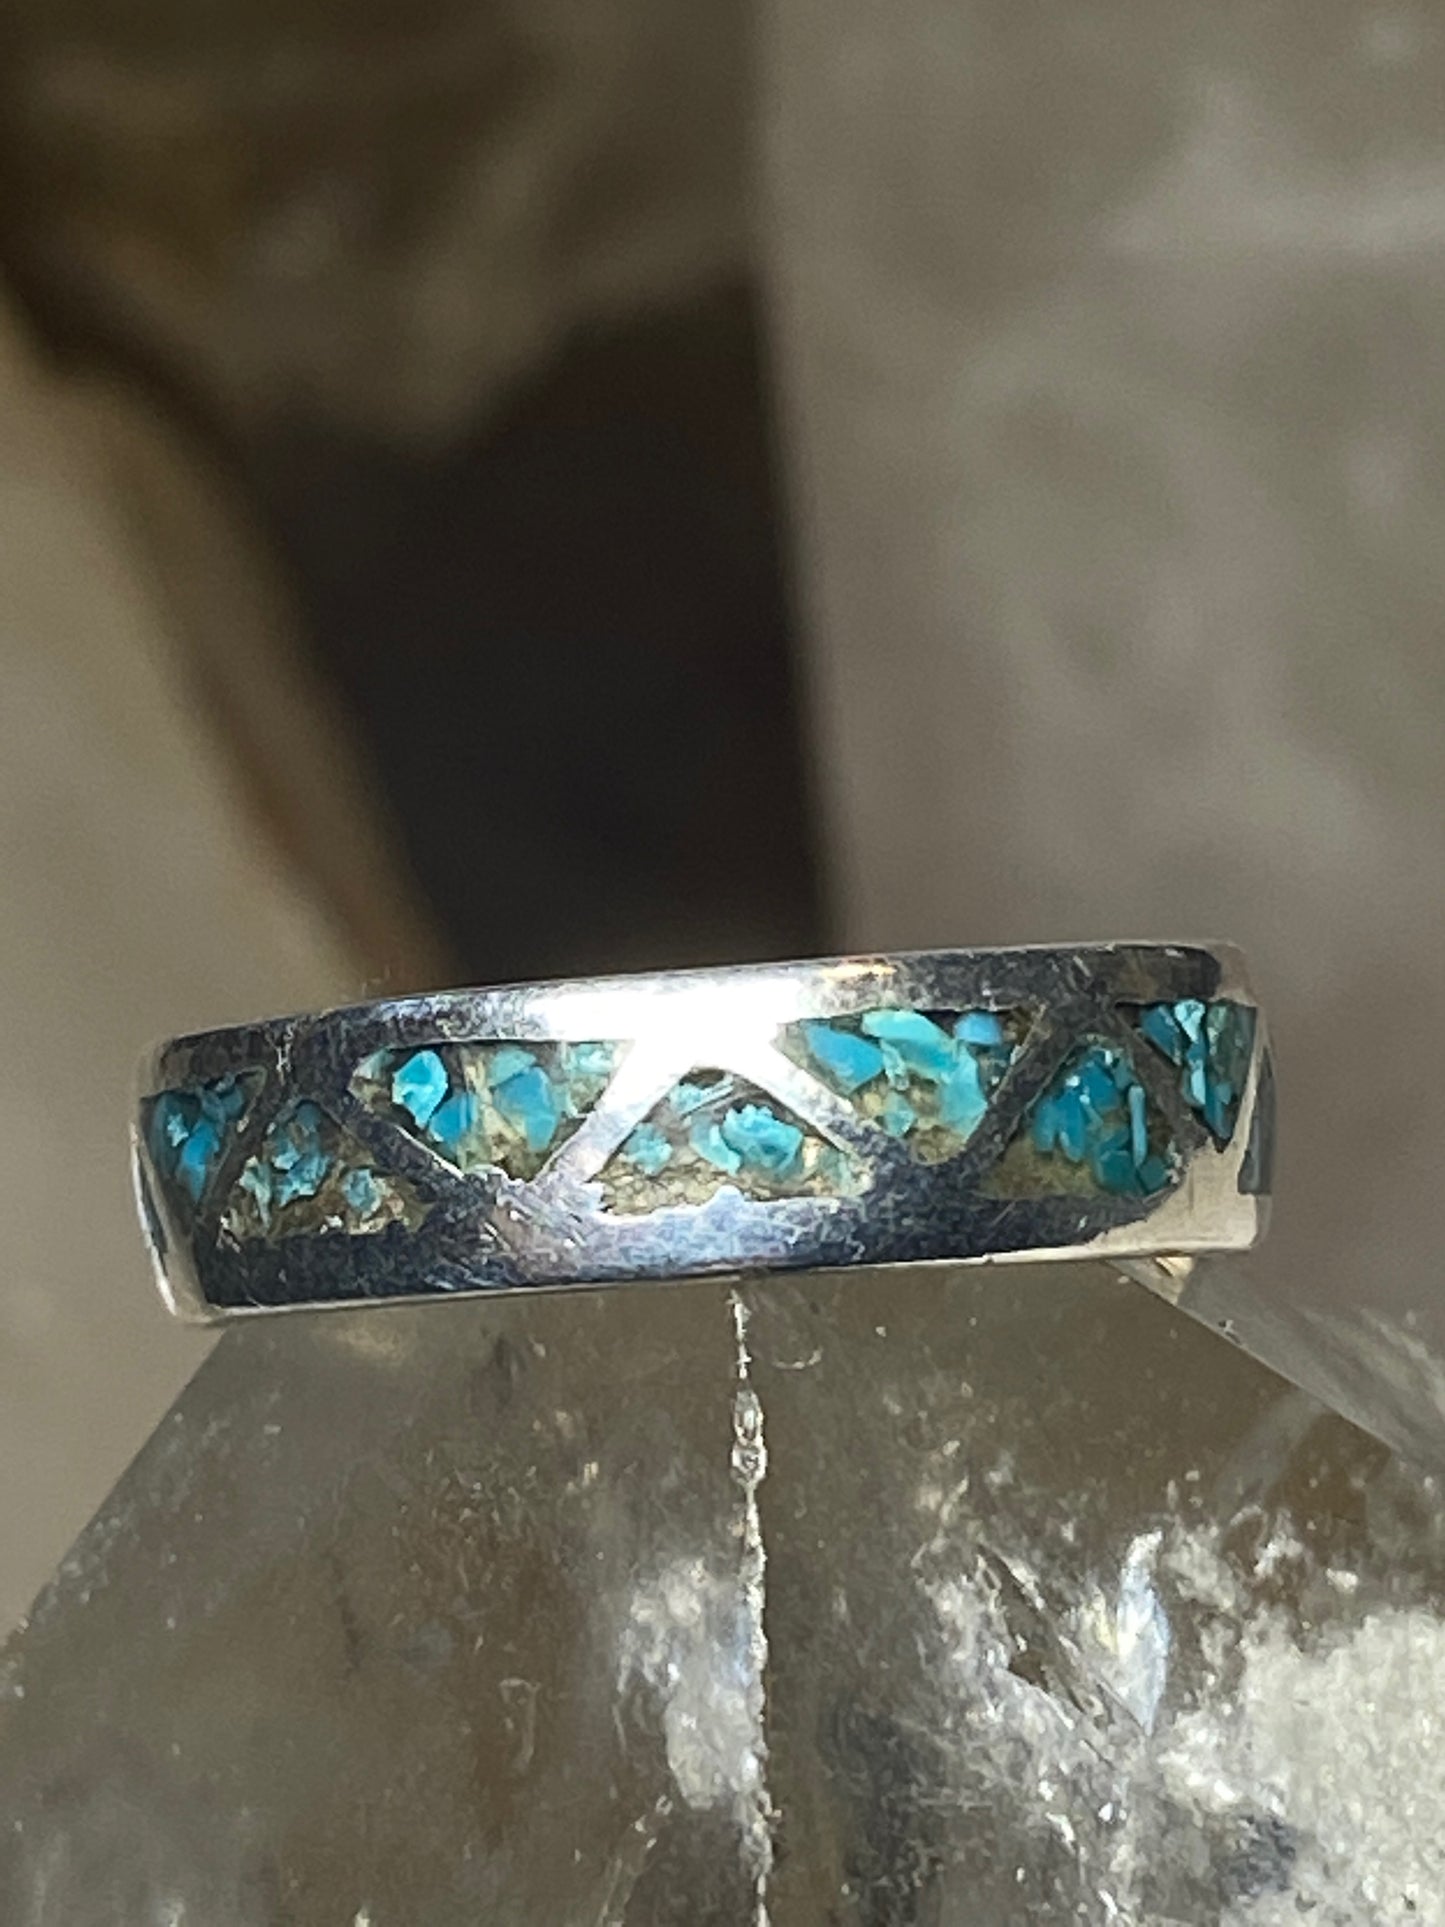 Turquoise ring size 7.75 wedding Zuni band sterling silver